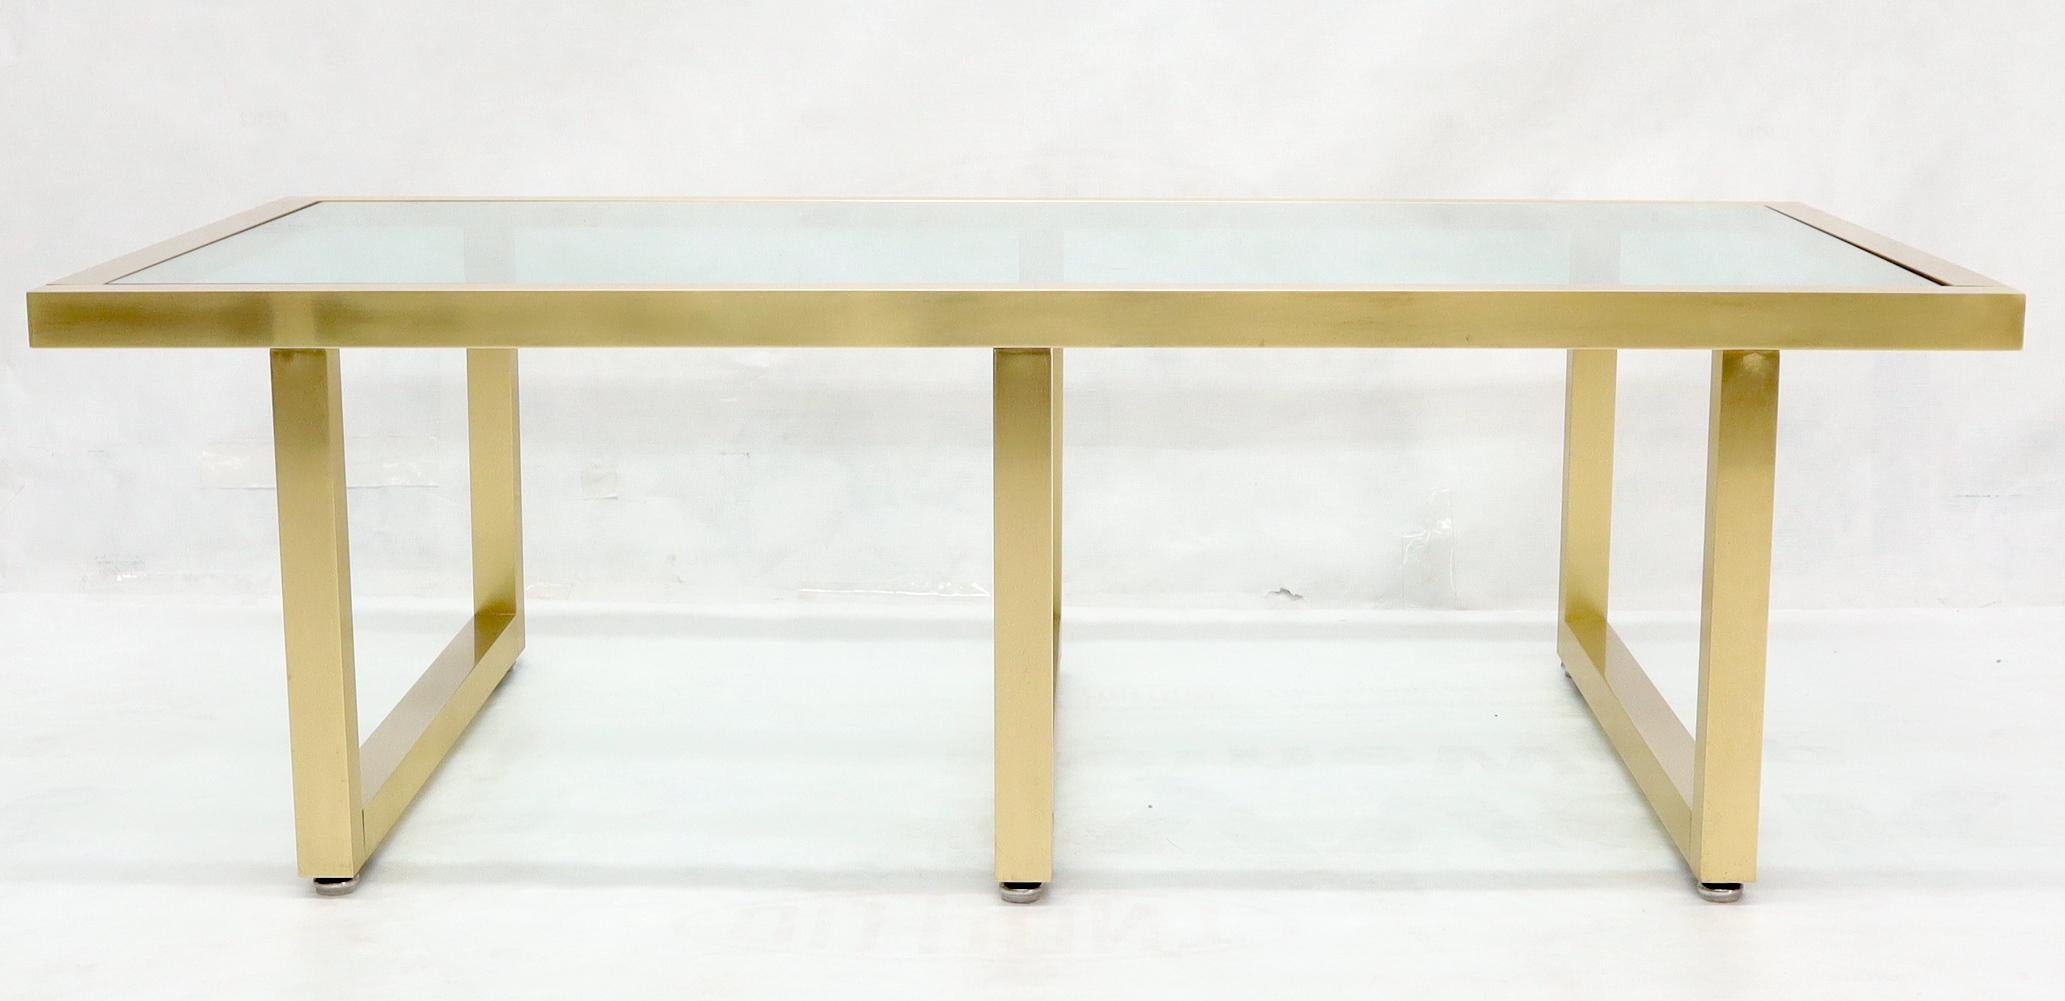 Brass Frame Shape Base Glass Top Rectangular Coffee Table In Excellent Condition For Sale In Rockaway, NJ